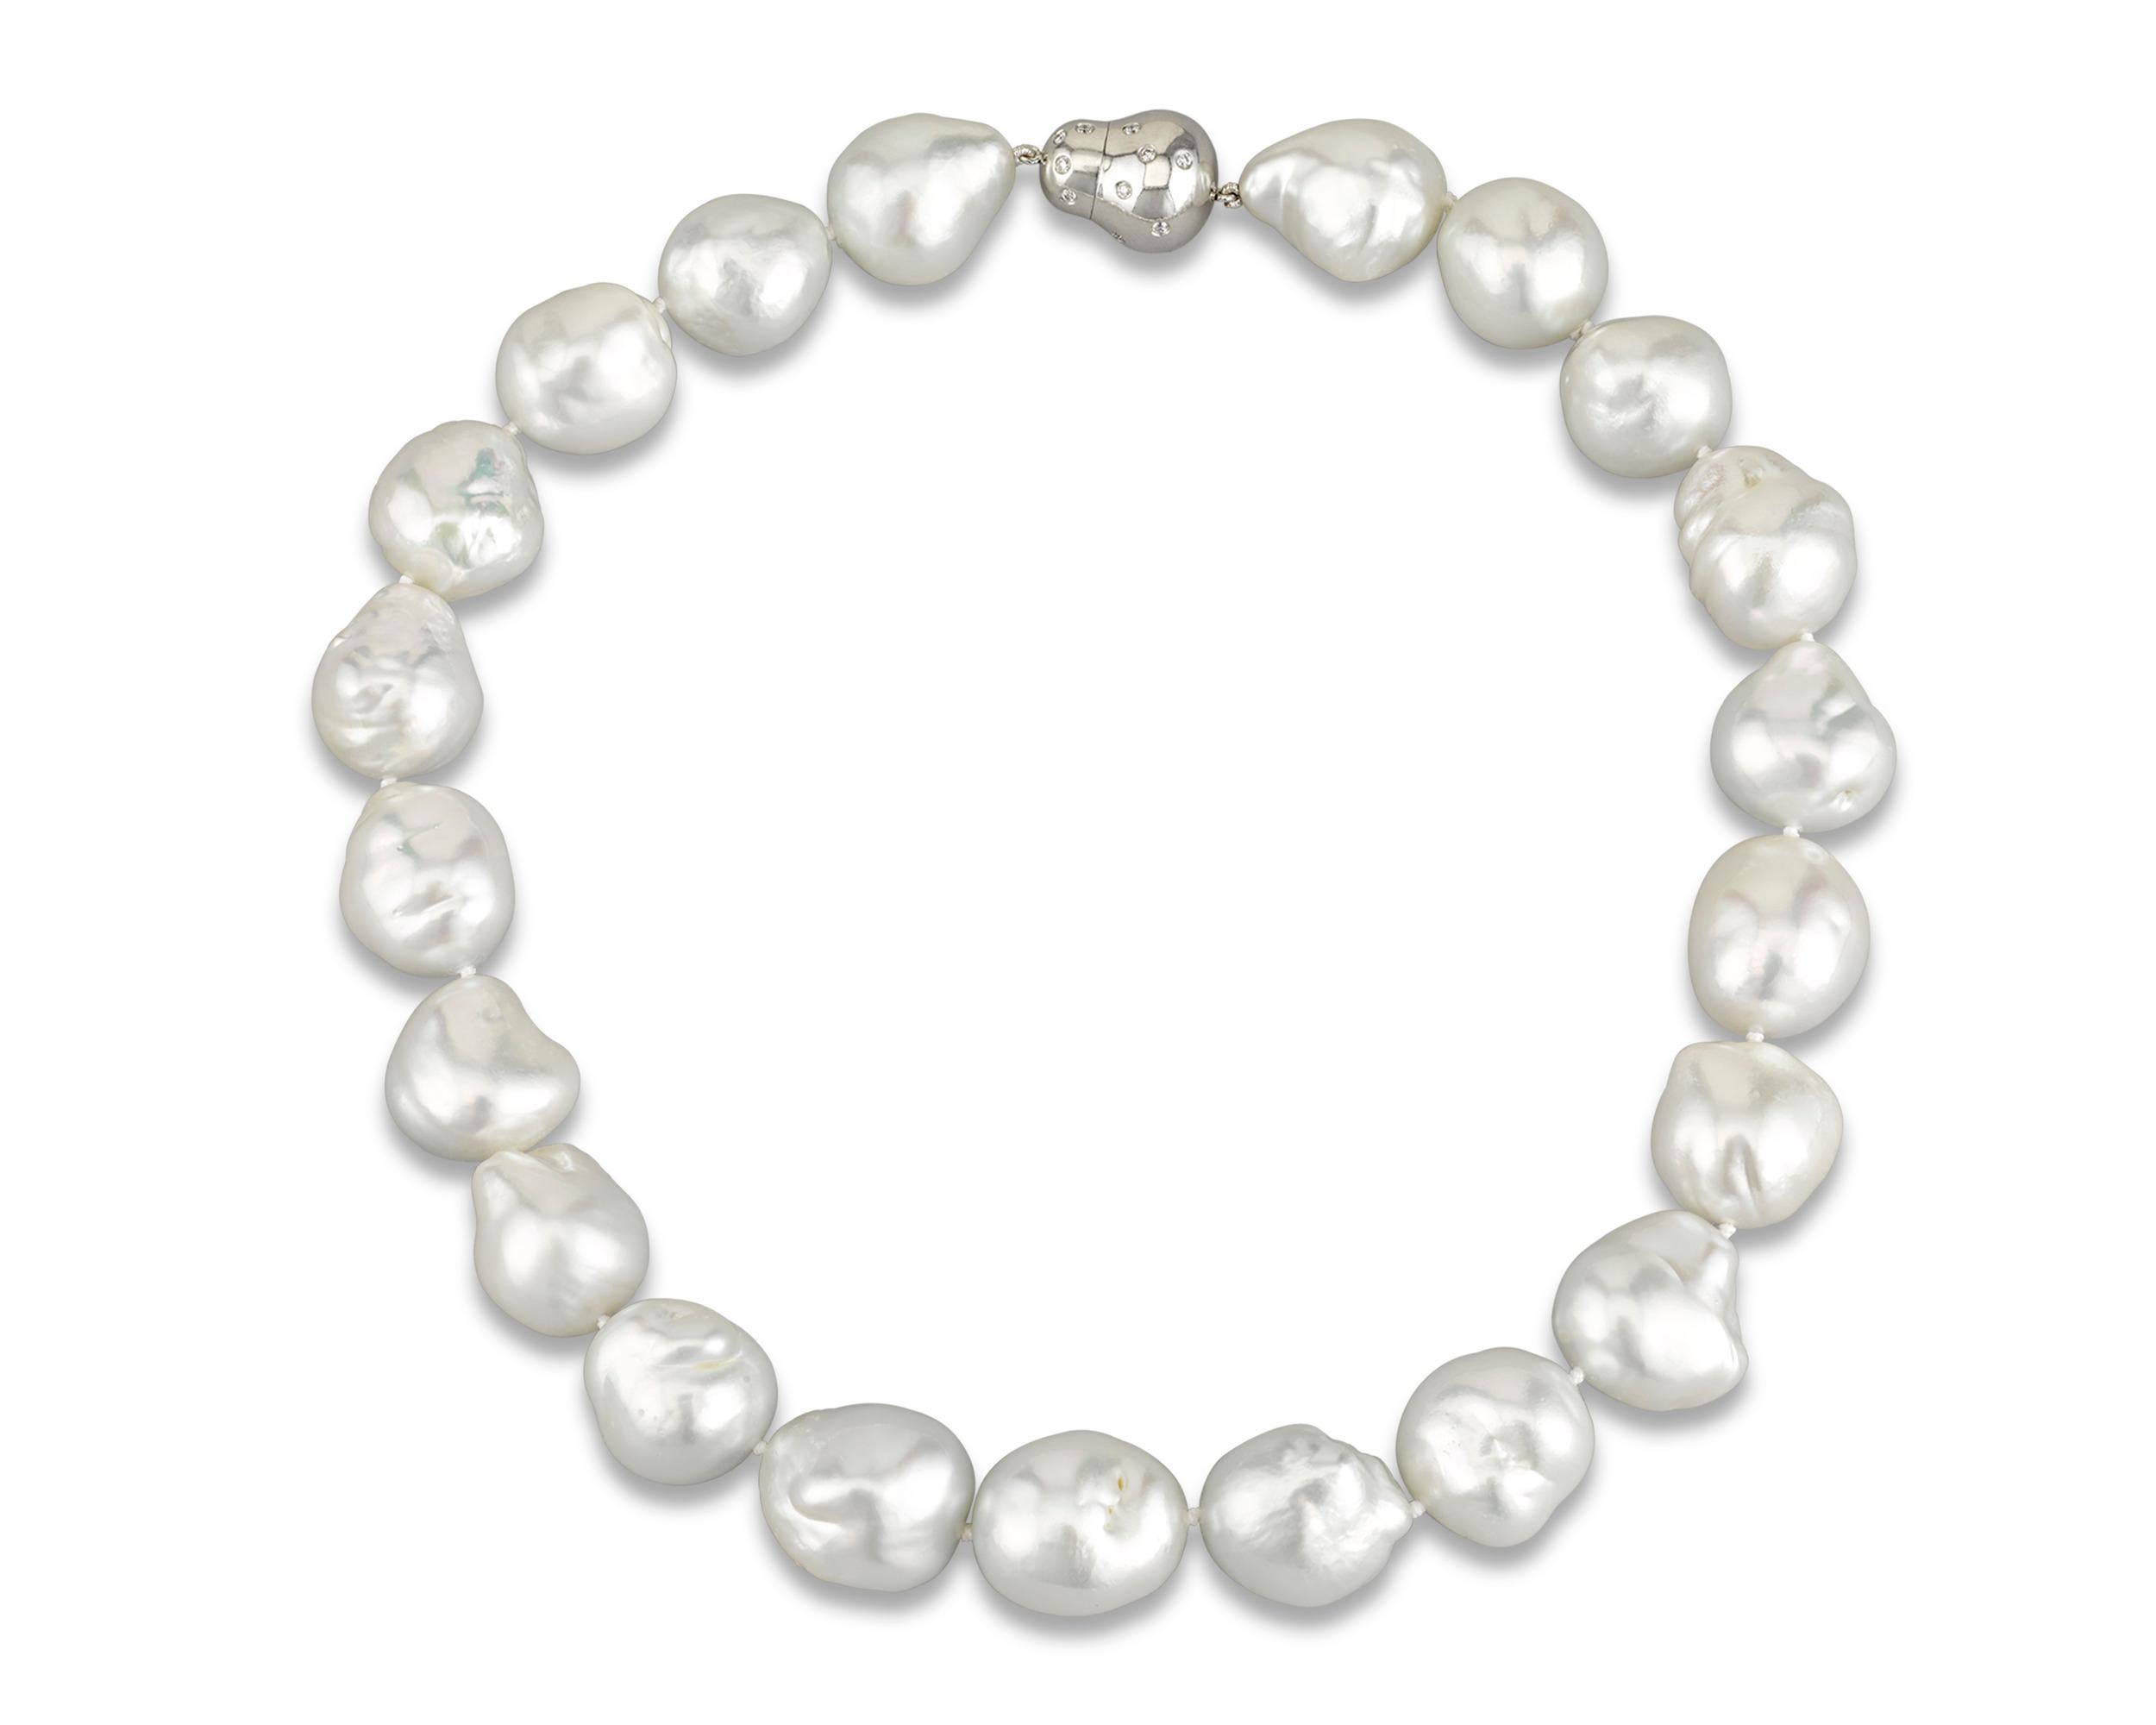 Exhibiting the unparalleled luster for which South Sea pearls are so prized, the white Baroque pearls in this necklace measure a remarkable 19.5mm to 18mm. South Sea pearls are among the rarest and most coveted in the world thanks to their large